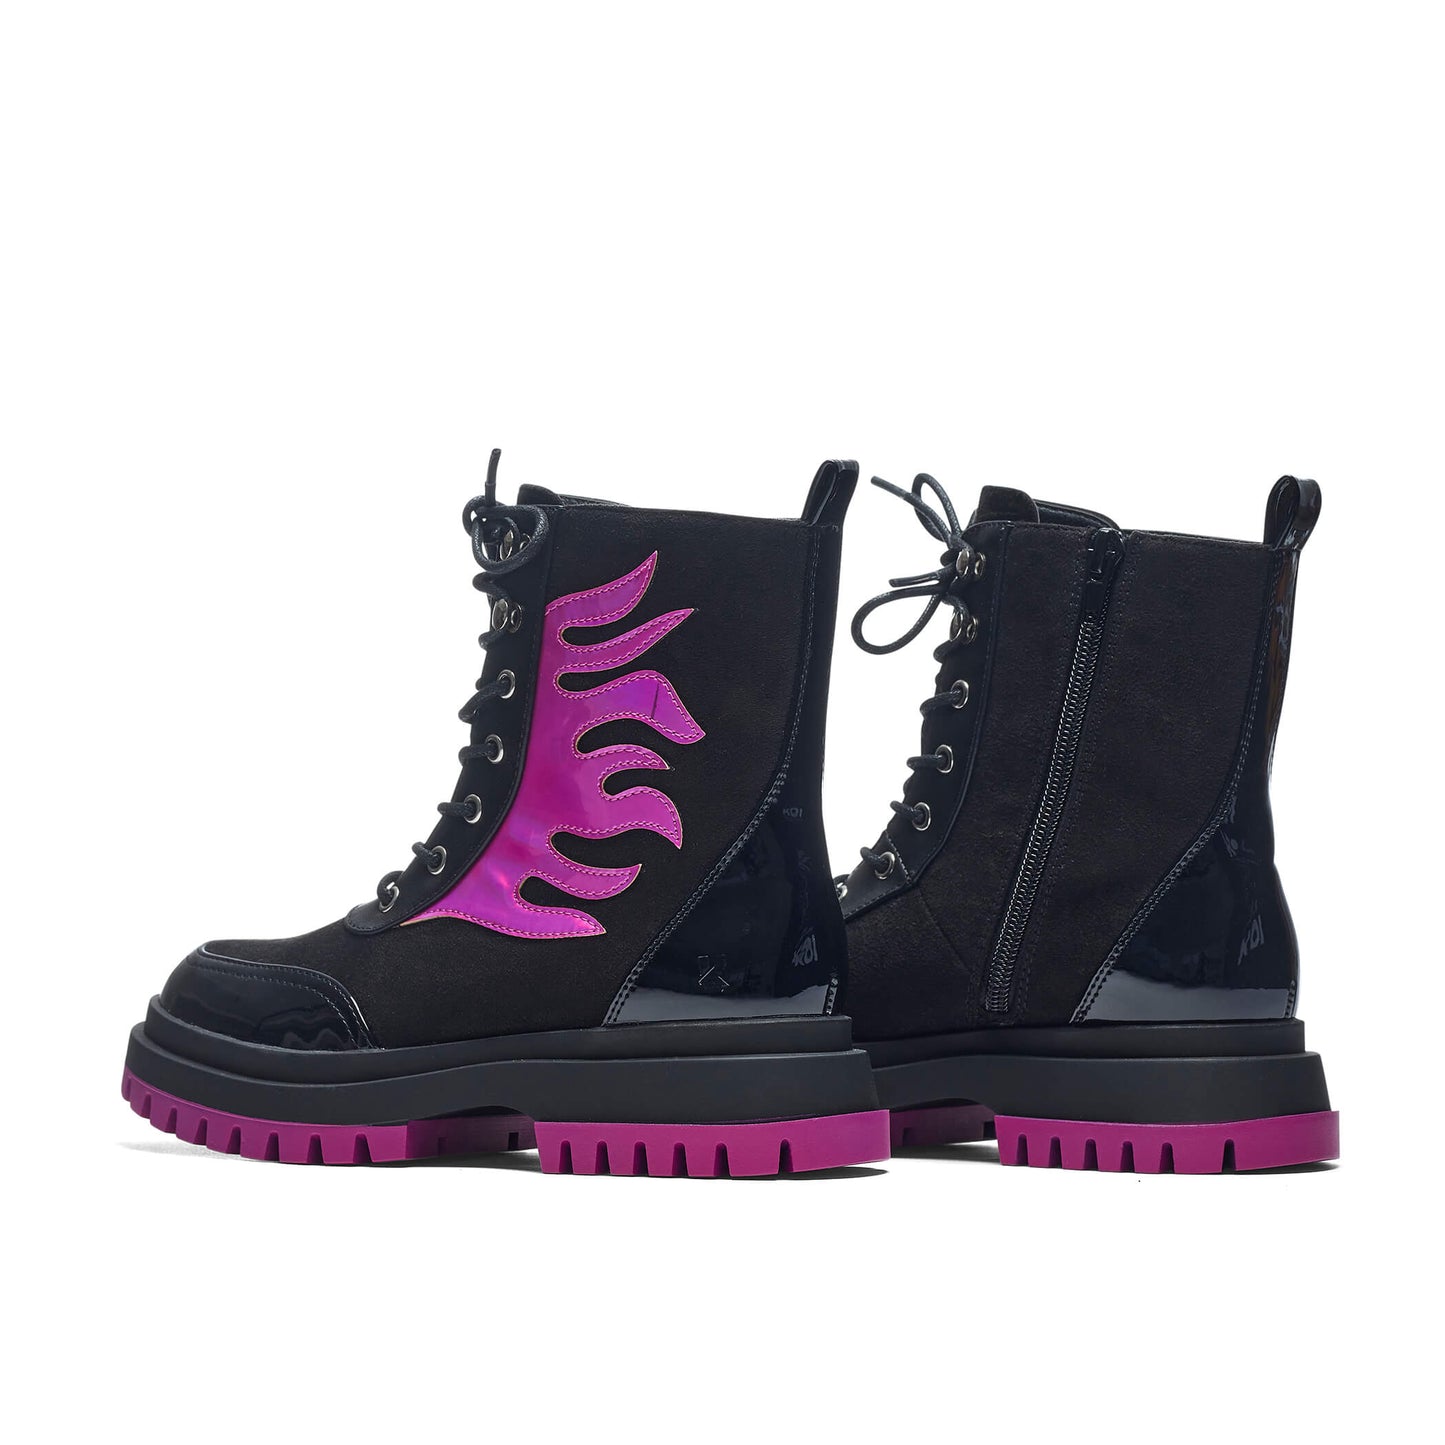 Lil’ Helios Purple Flame Boots - Ankle Boots - KOI Footwear - Black - Back Side View